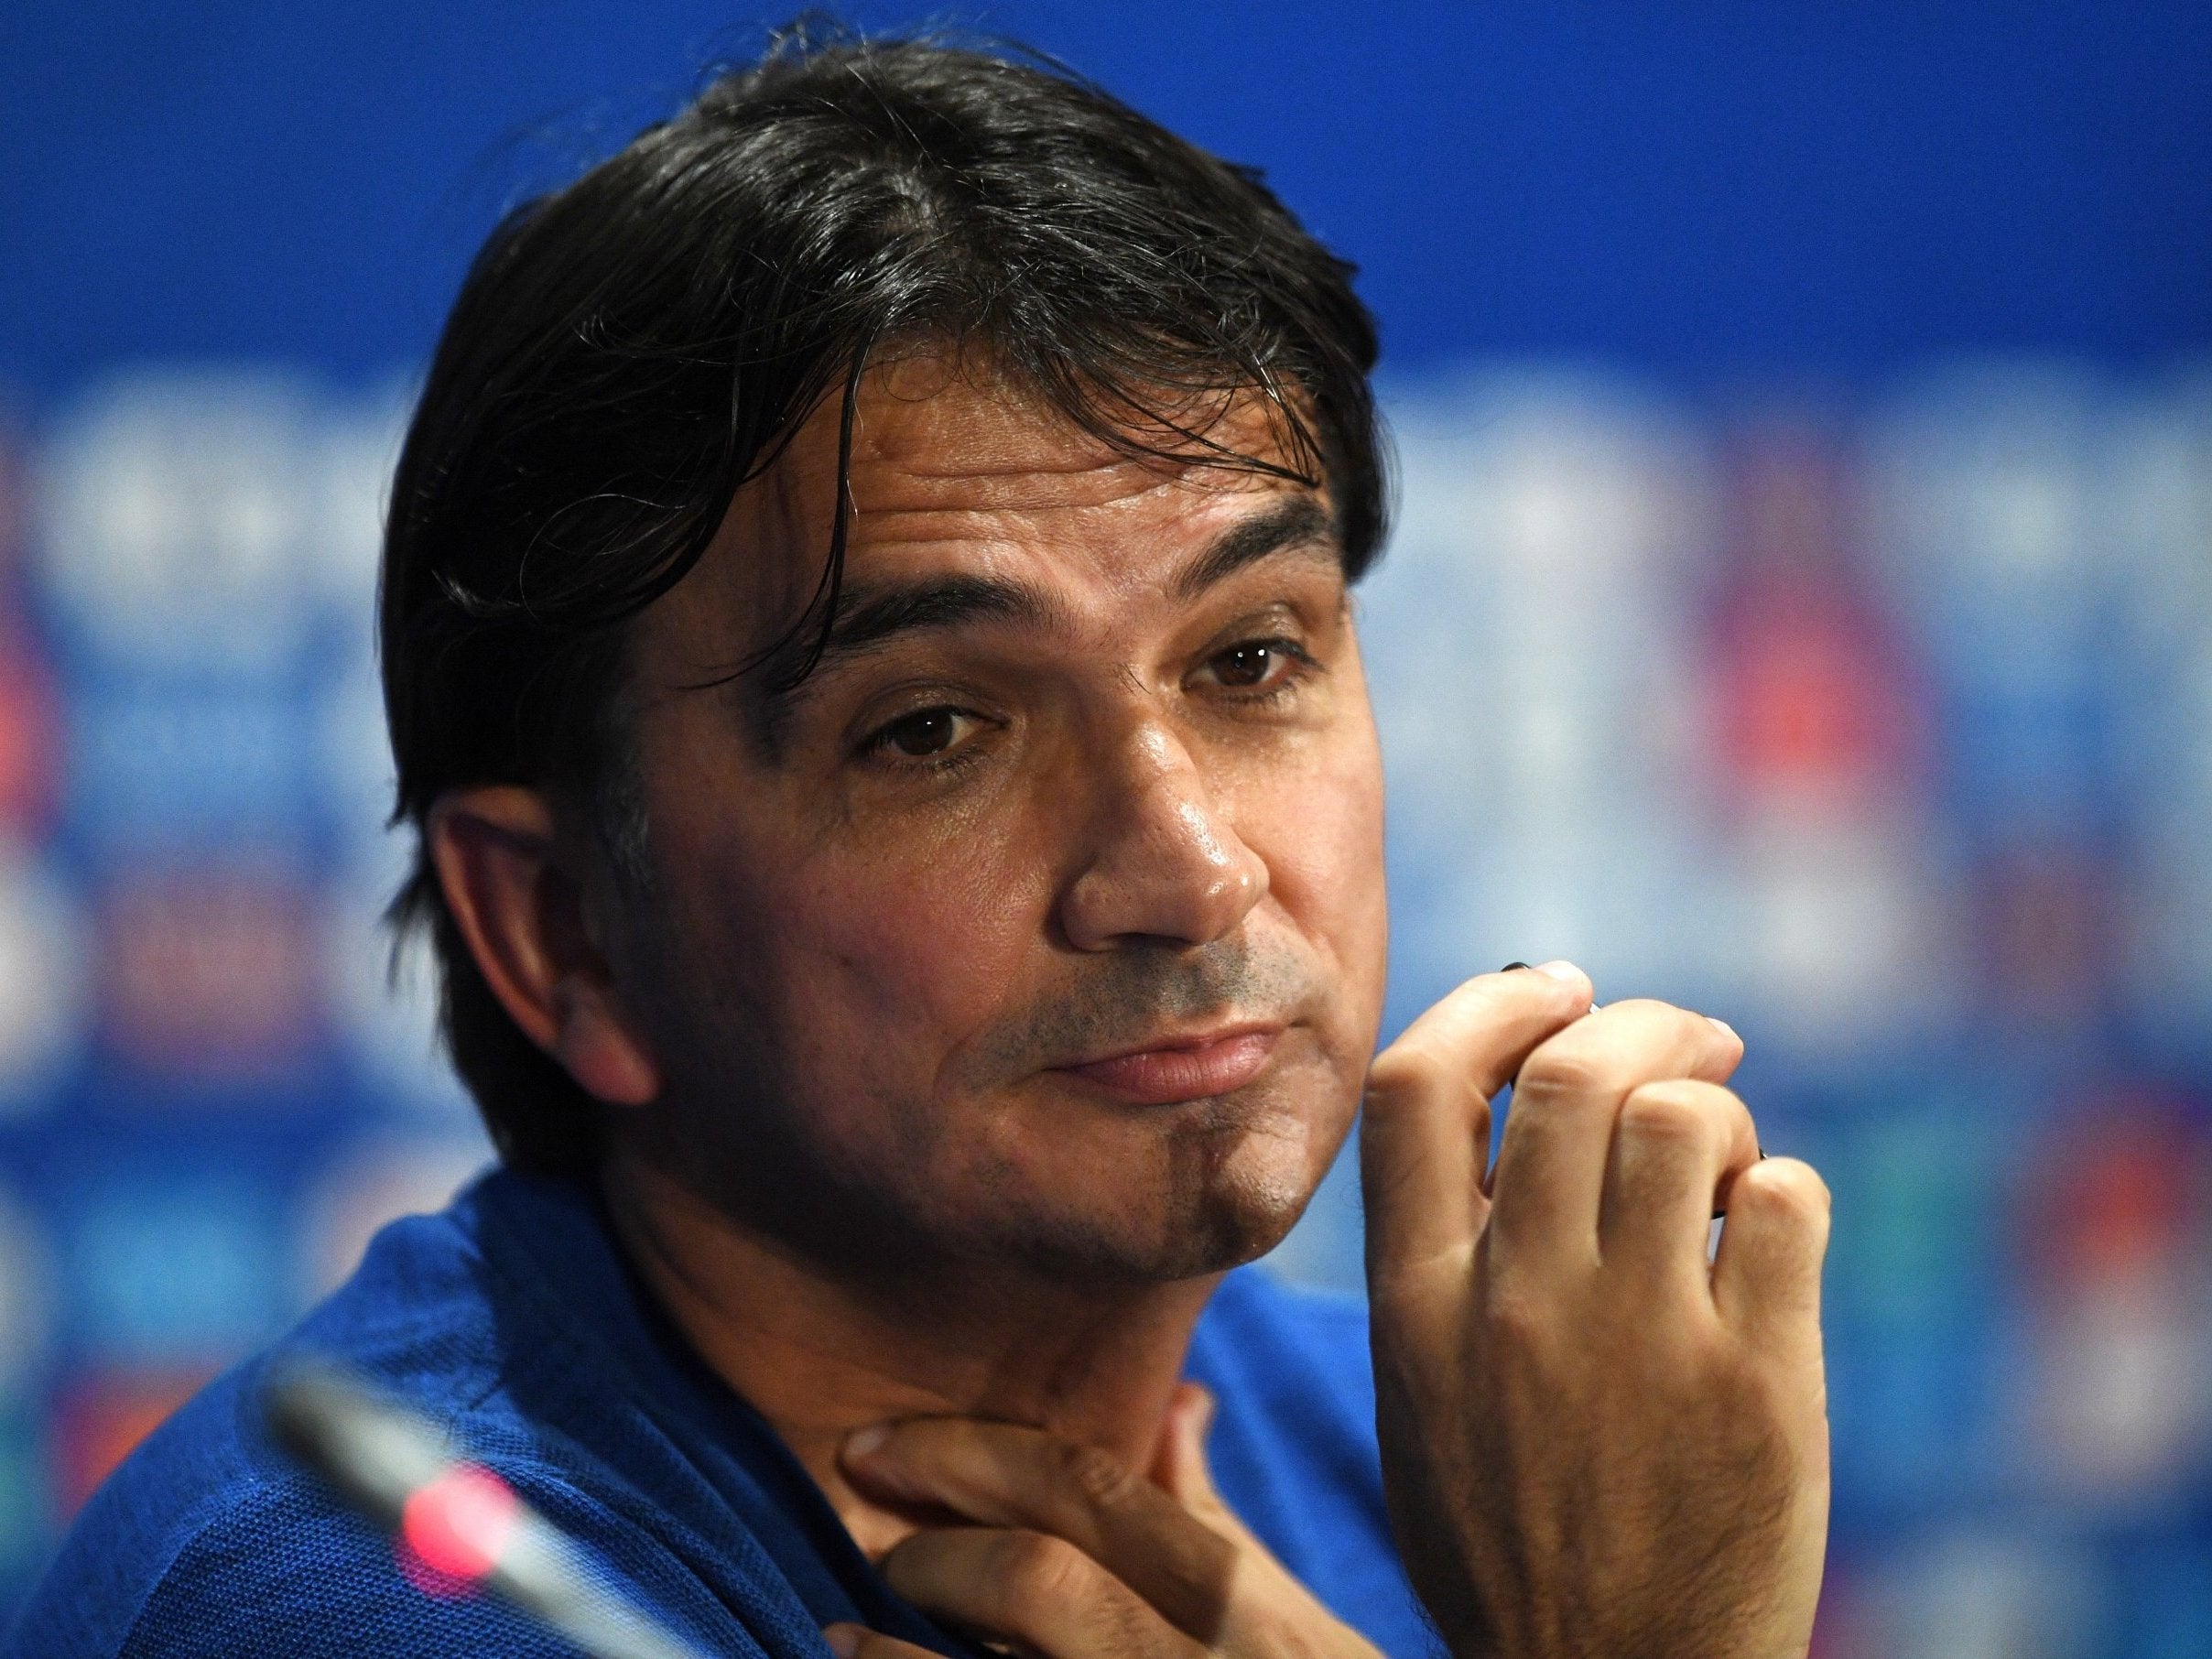 Dalic guided his side all the way to the World Cup final last summer